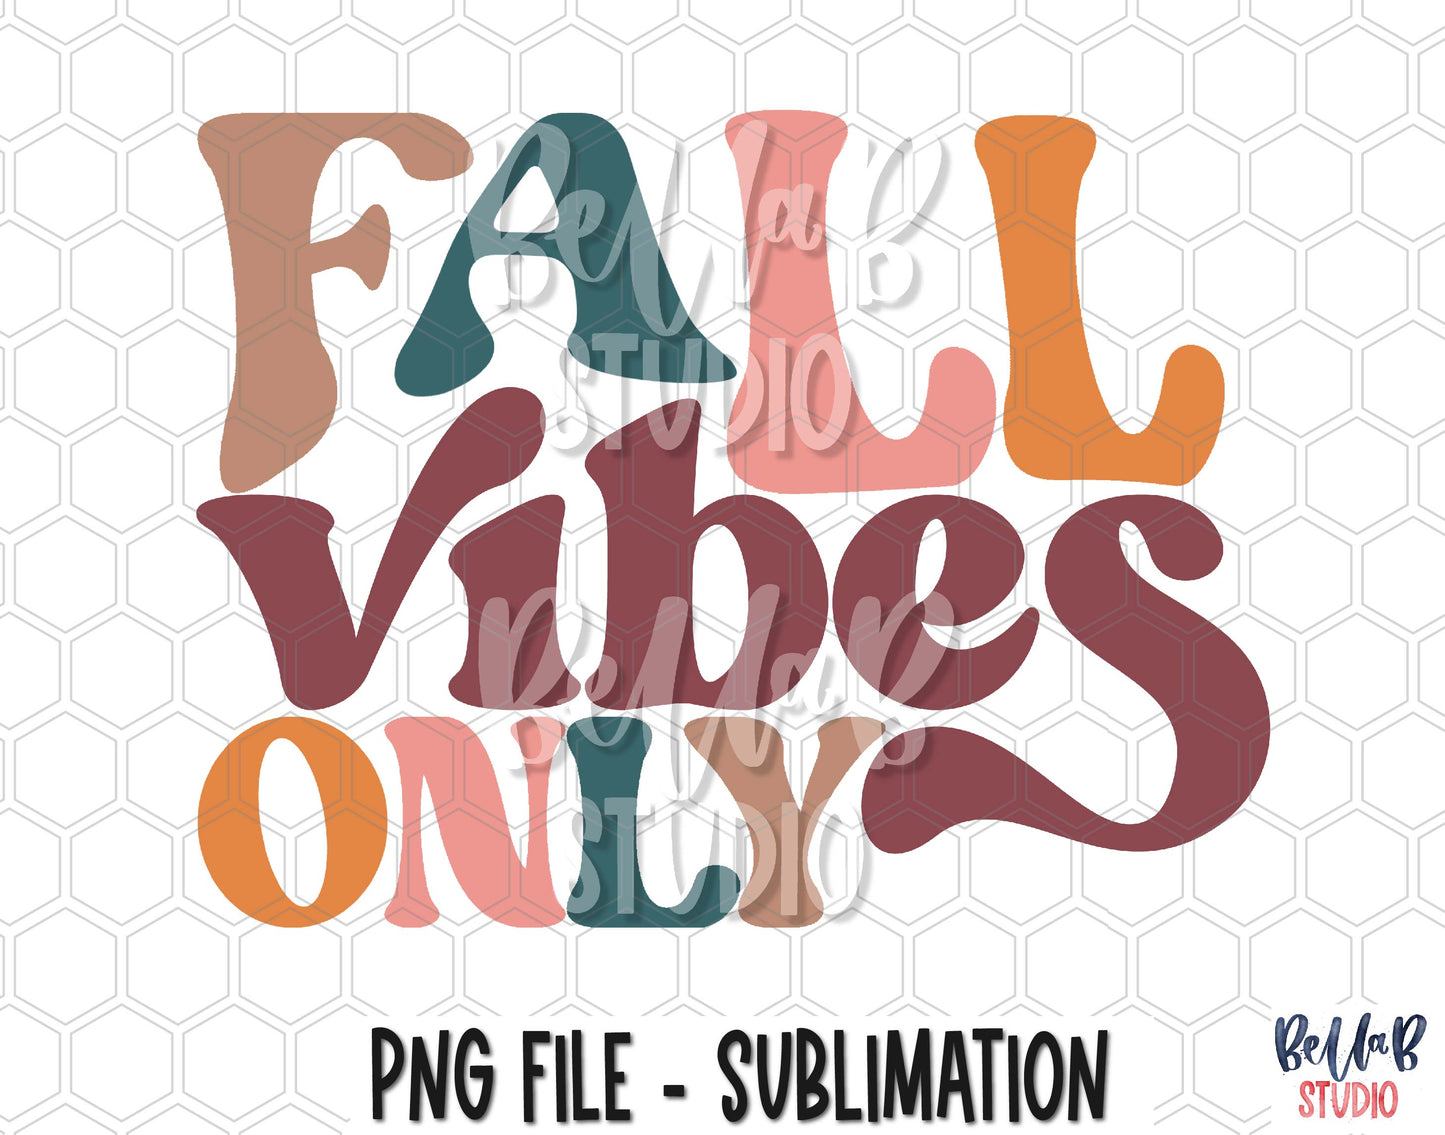 Fall Vibes Only Retro Sublimation Design